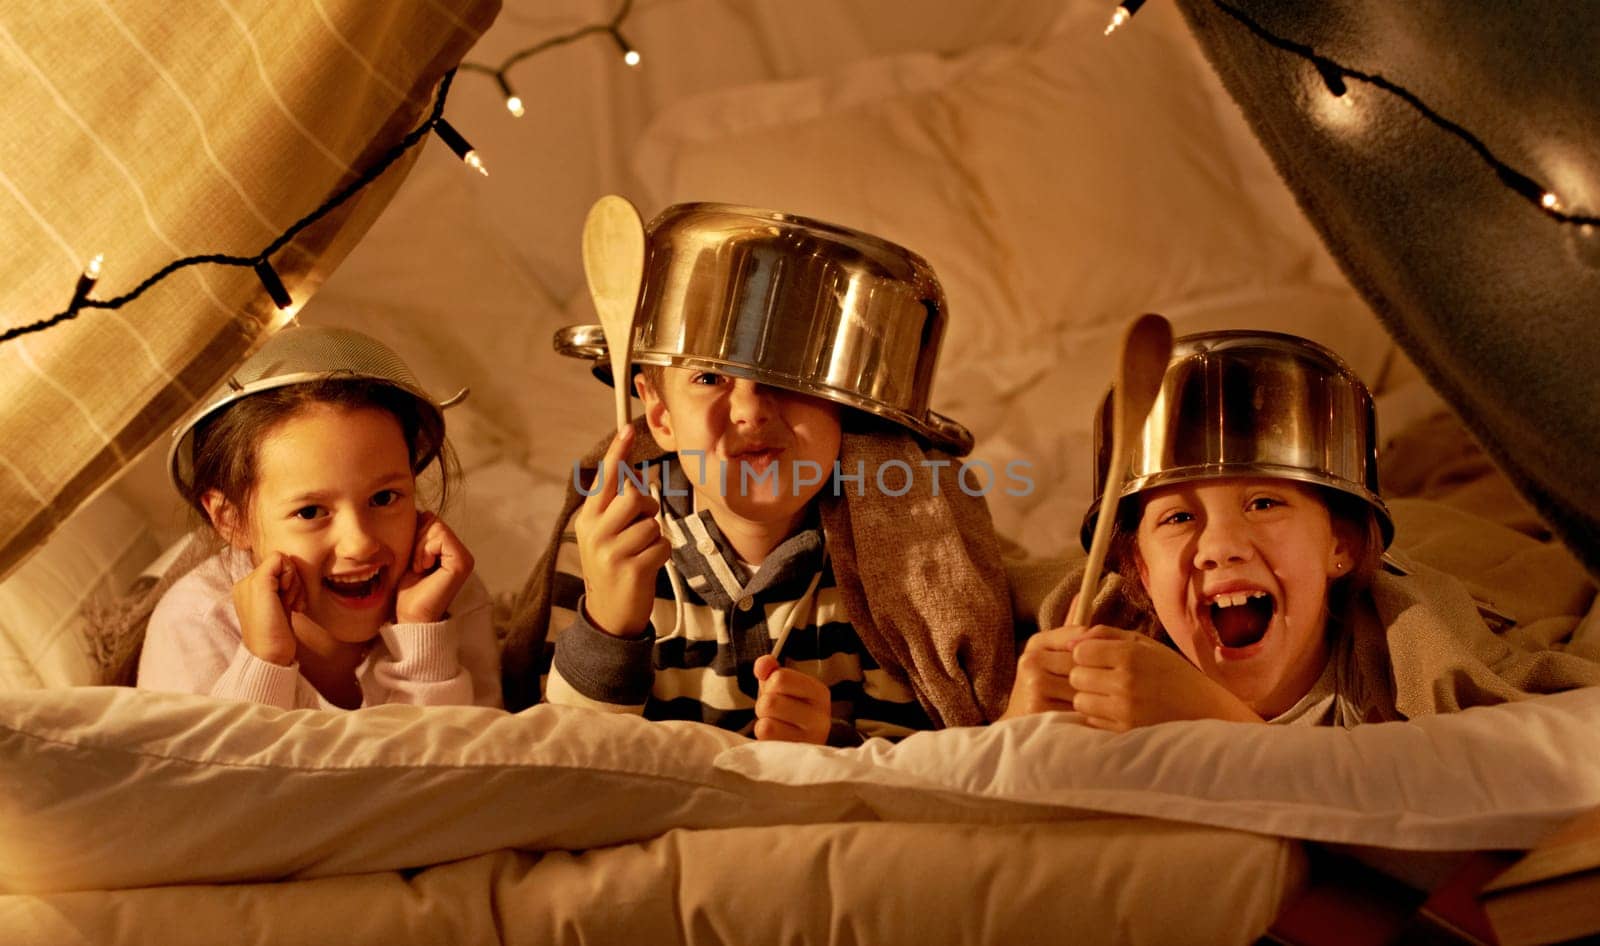 Tent, games and portrait of children at night in bedroom for playing and bonding together. Home, youth and happy kids with spoon, helmet pots and blanket fort for playful, imaginary and childhood fun by YuriArcurs